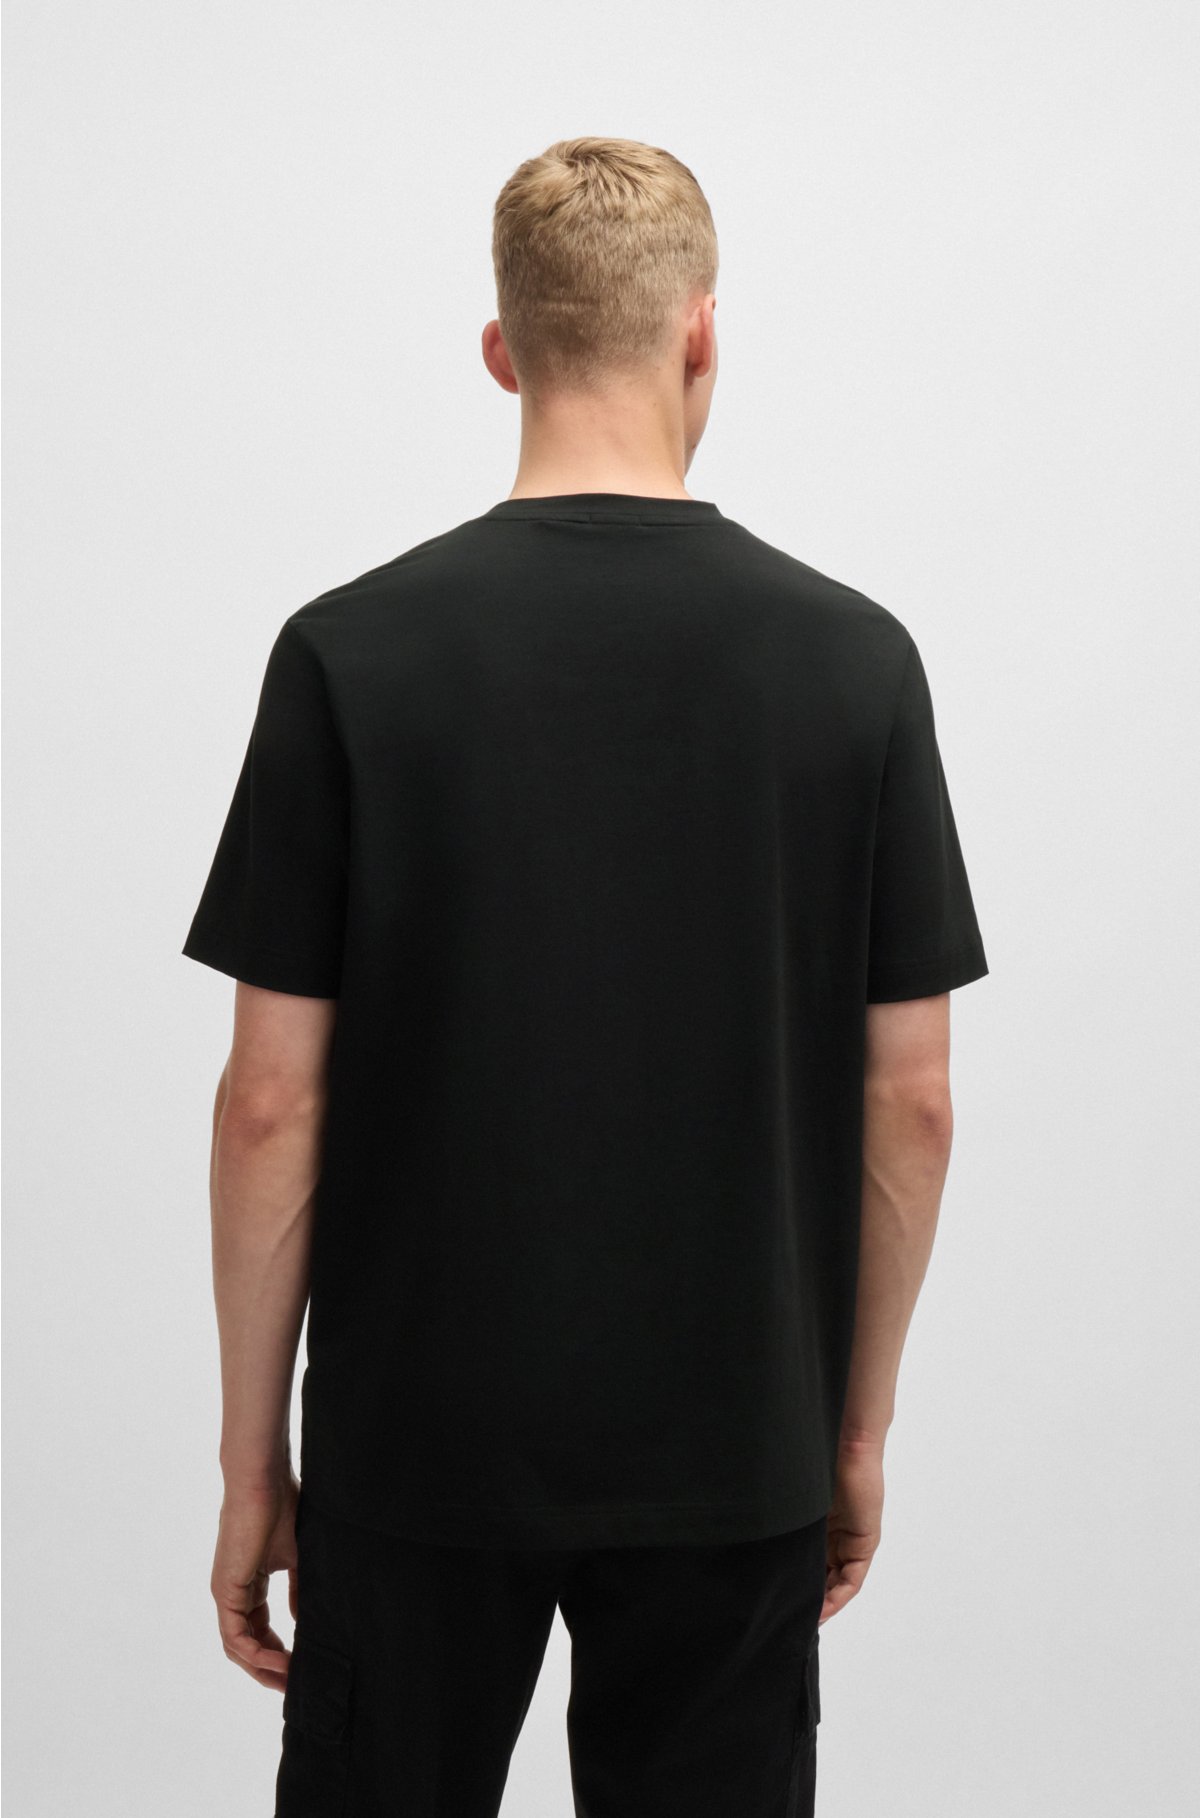 Relaxed fit short sleeve cotton T-shirt - Studio · Black, White, Dark Blue  · T-shirts And Polo Shirts